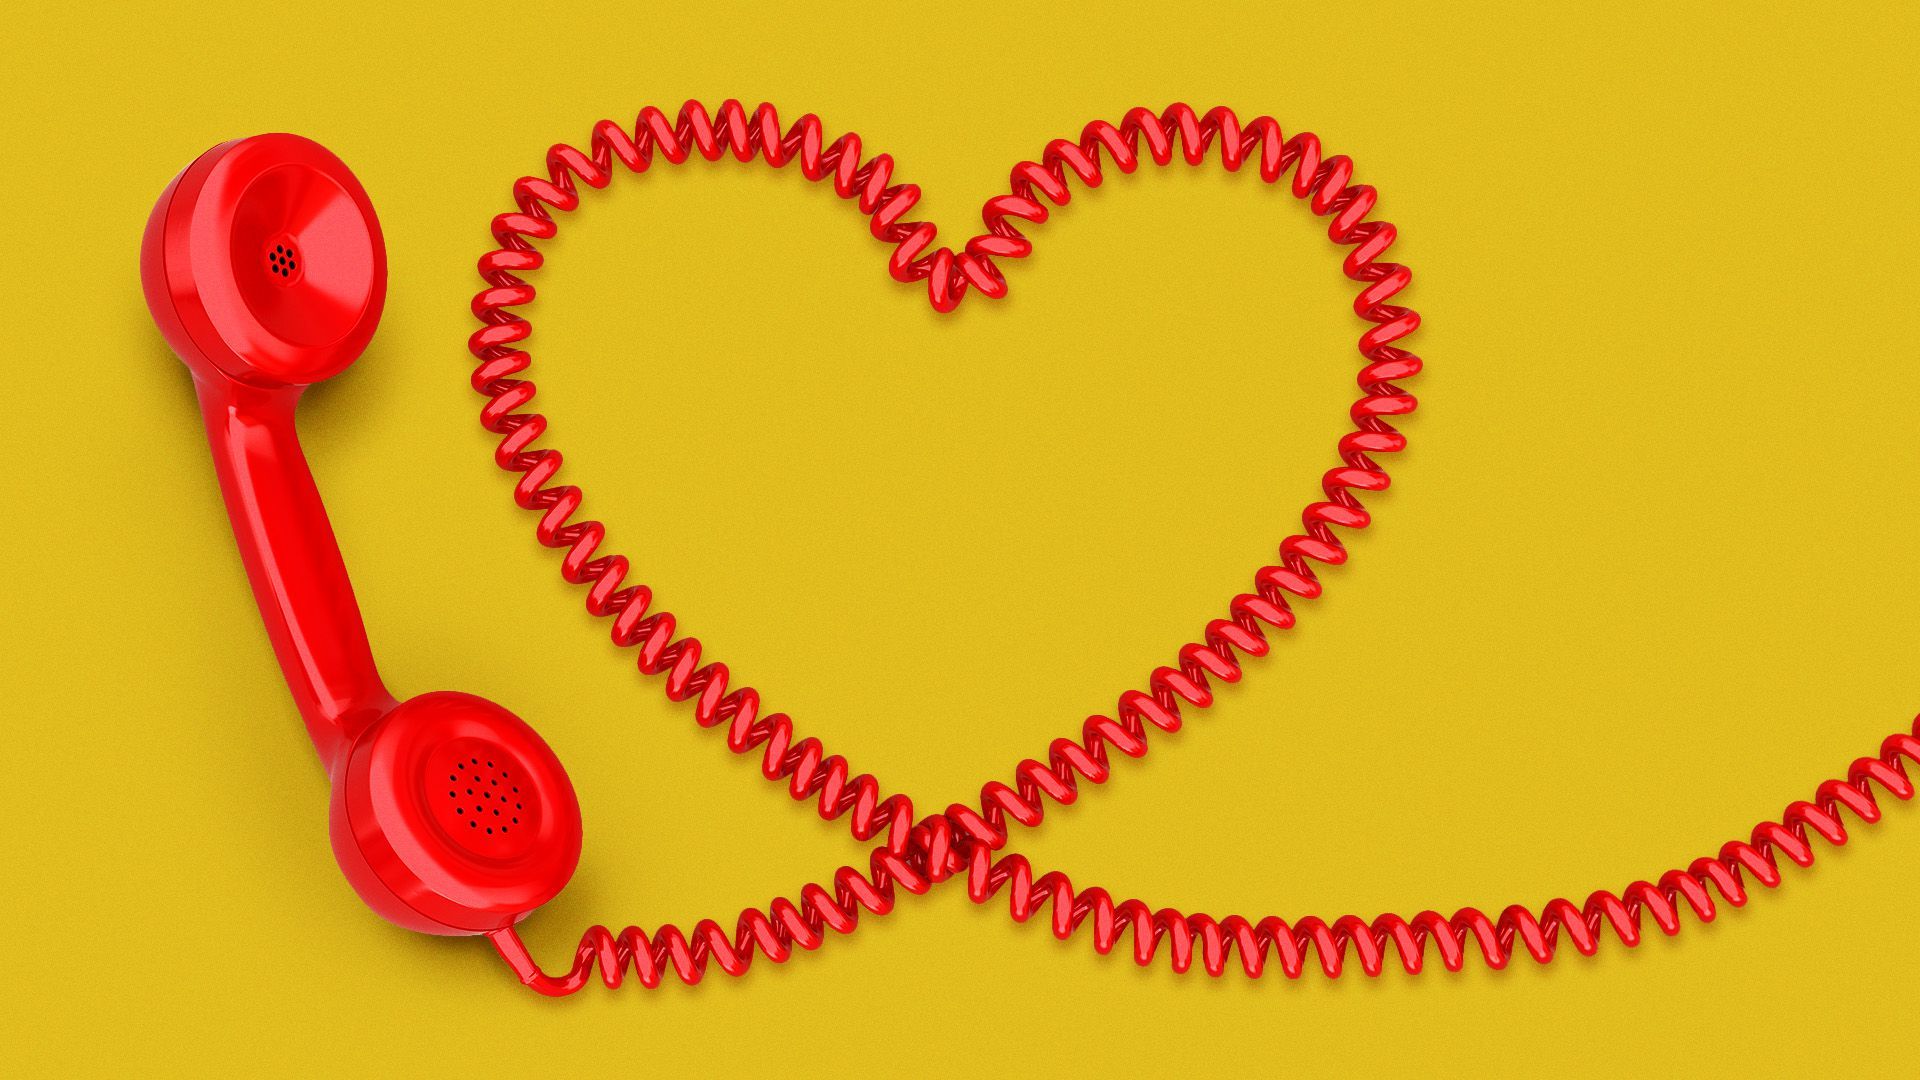 Illustration of a phone with the wire in the shape of a heart.